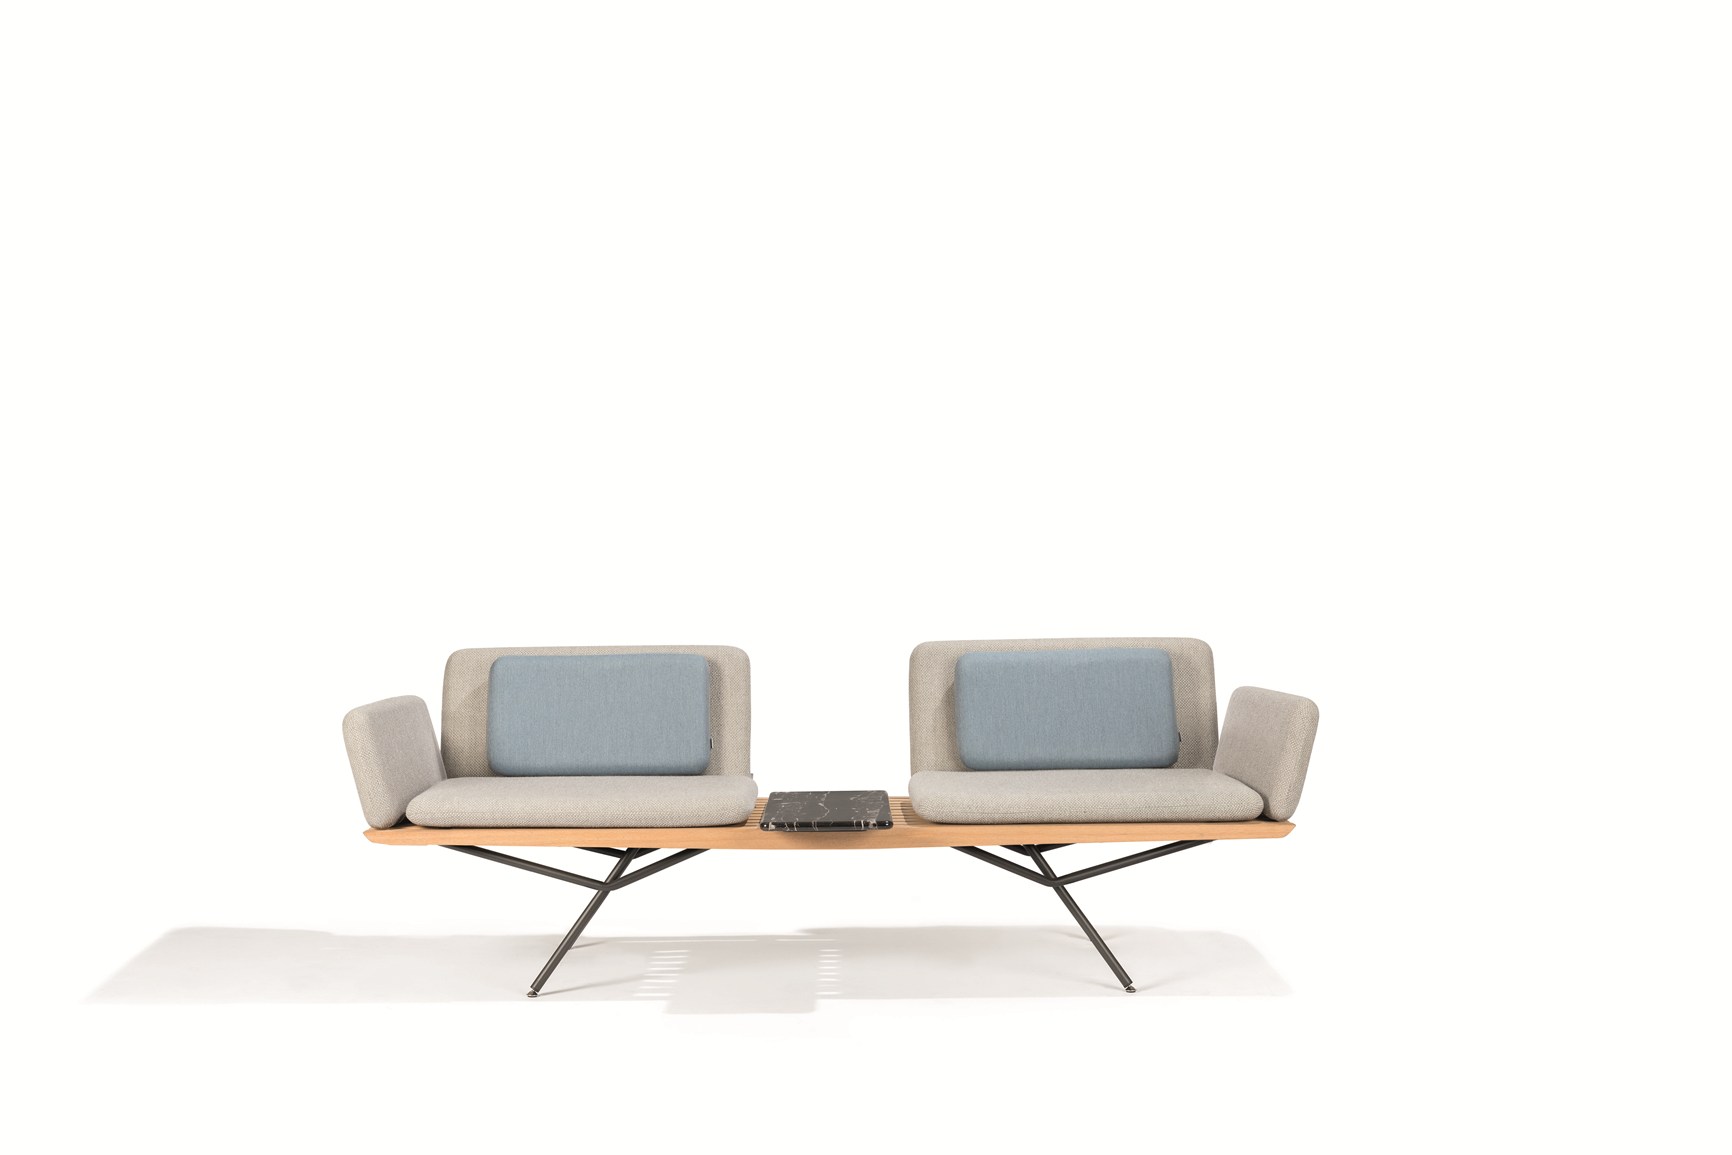 San Collection by Lionel Doyen for Manutti